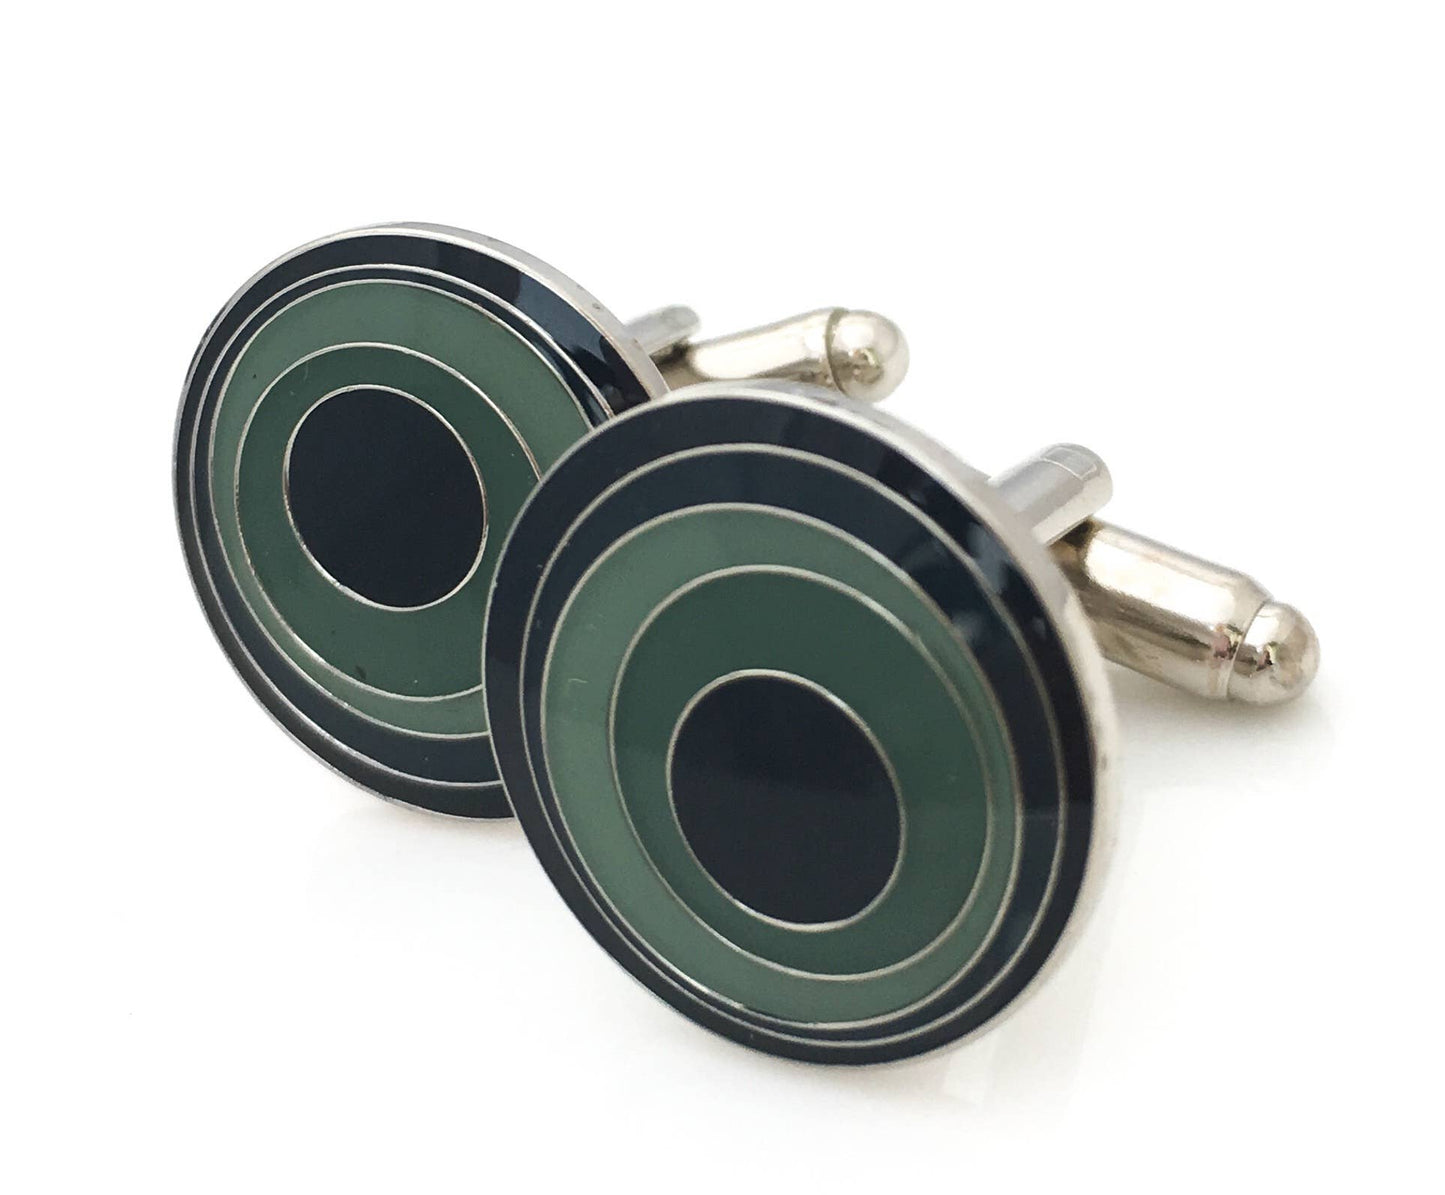 Round cufflinks with circles within circles in gray